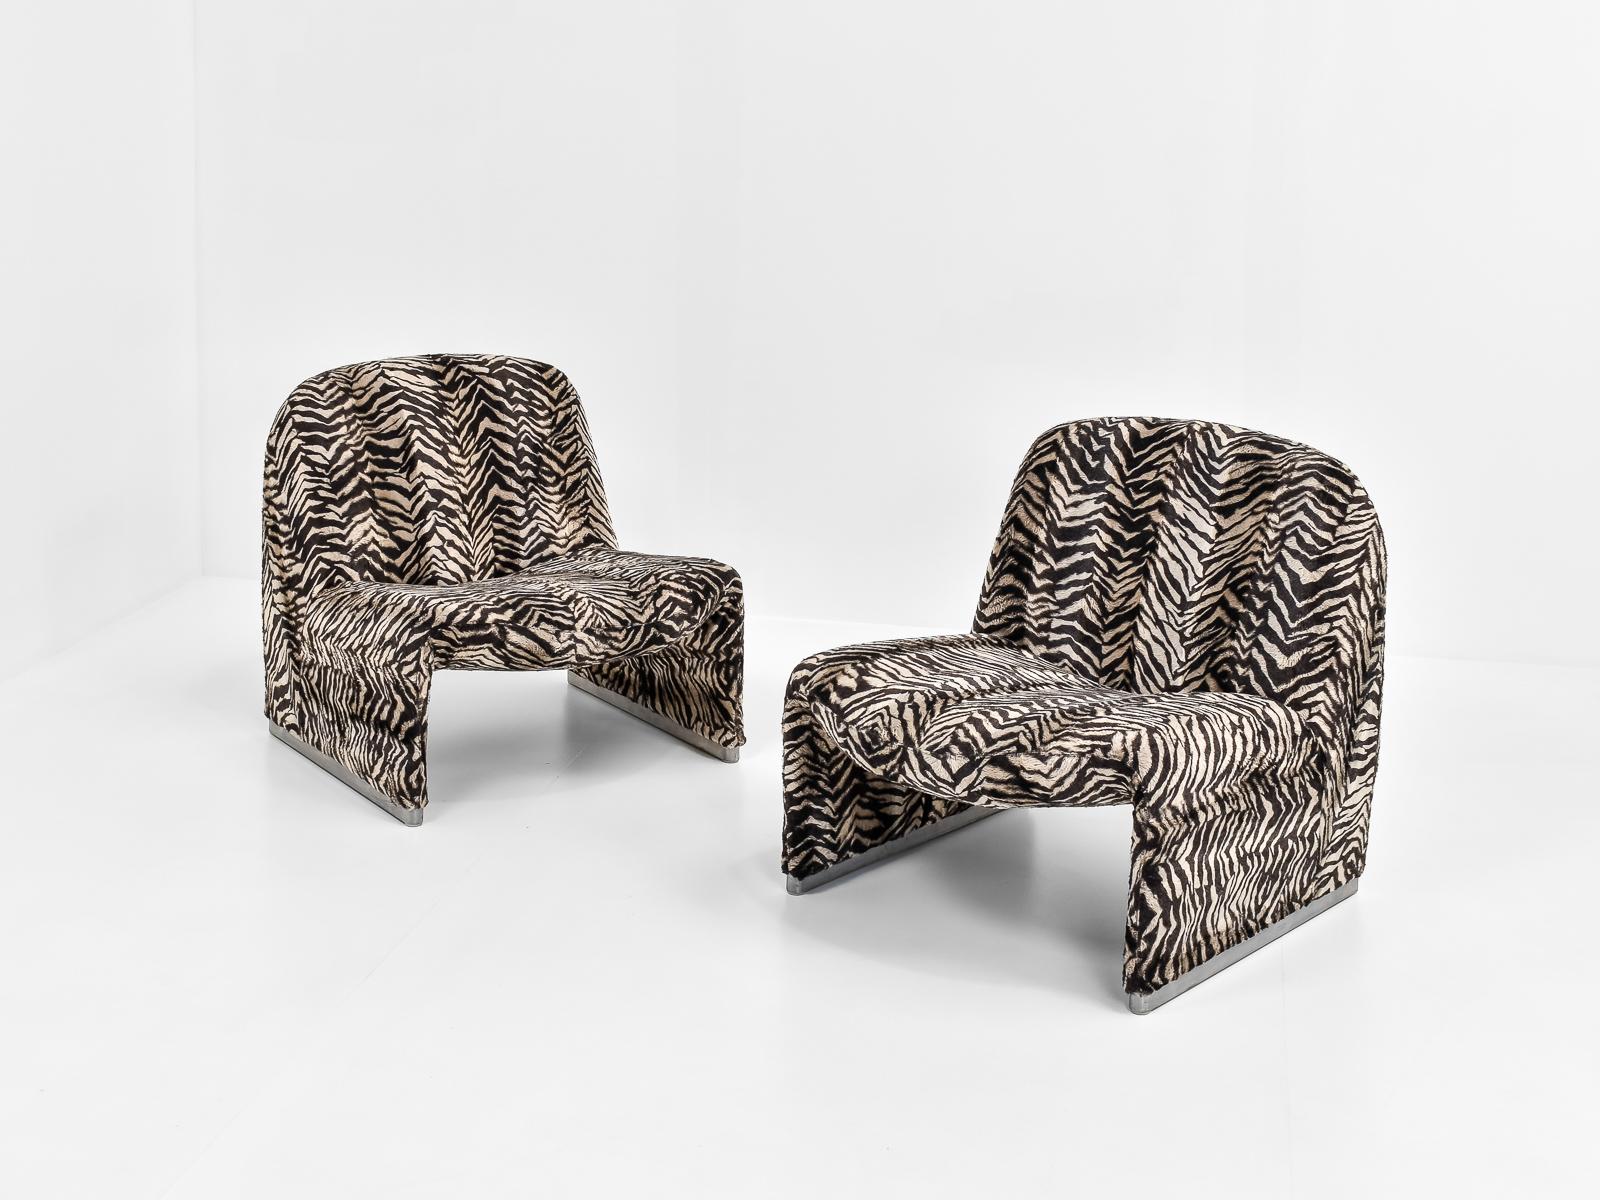 The chair was designed by Giancarlo Piretti for Anonima Castelli in Italy early 1970s. 

These chairs once belonged to the city of Liège, Belgium. 

The upholstery is in a fluffy, zebra-print, which makes them a real funky eye-catcher. Unique